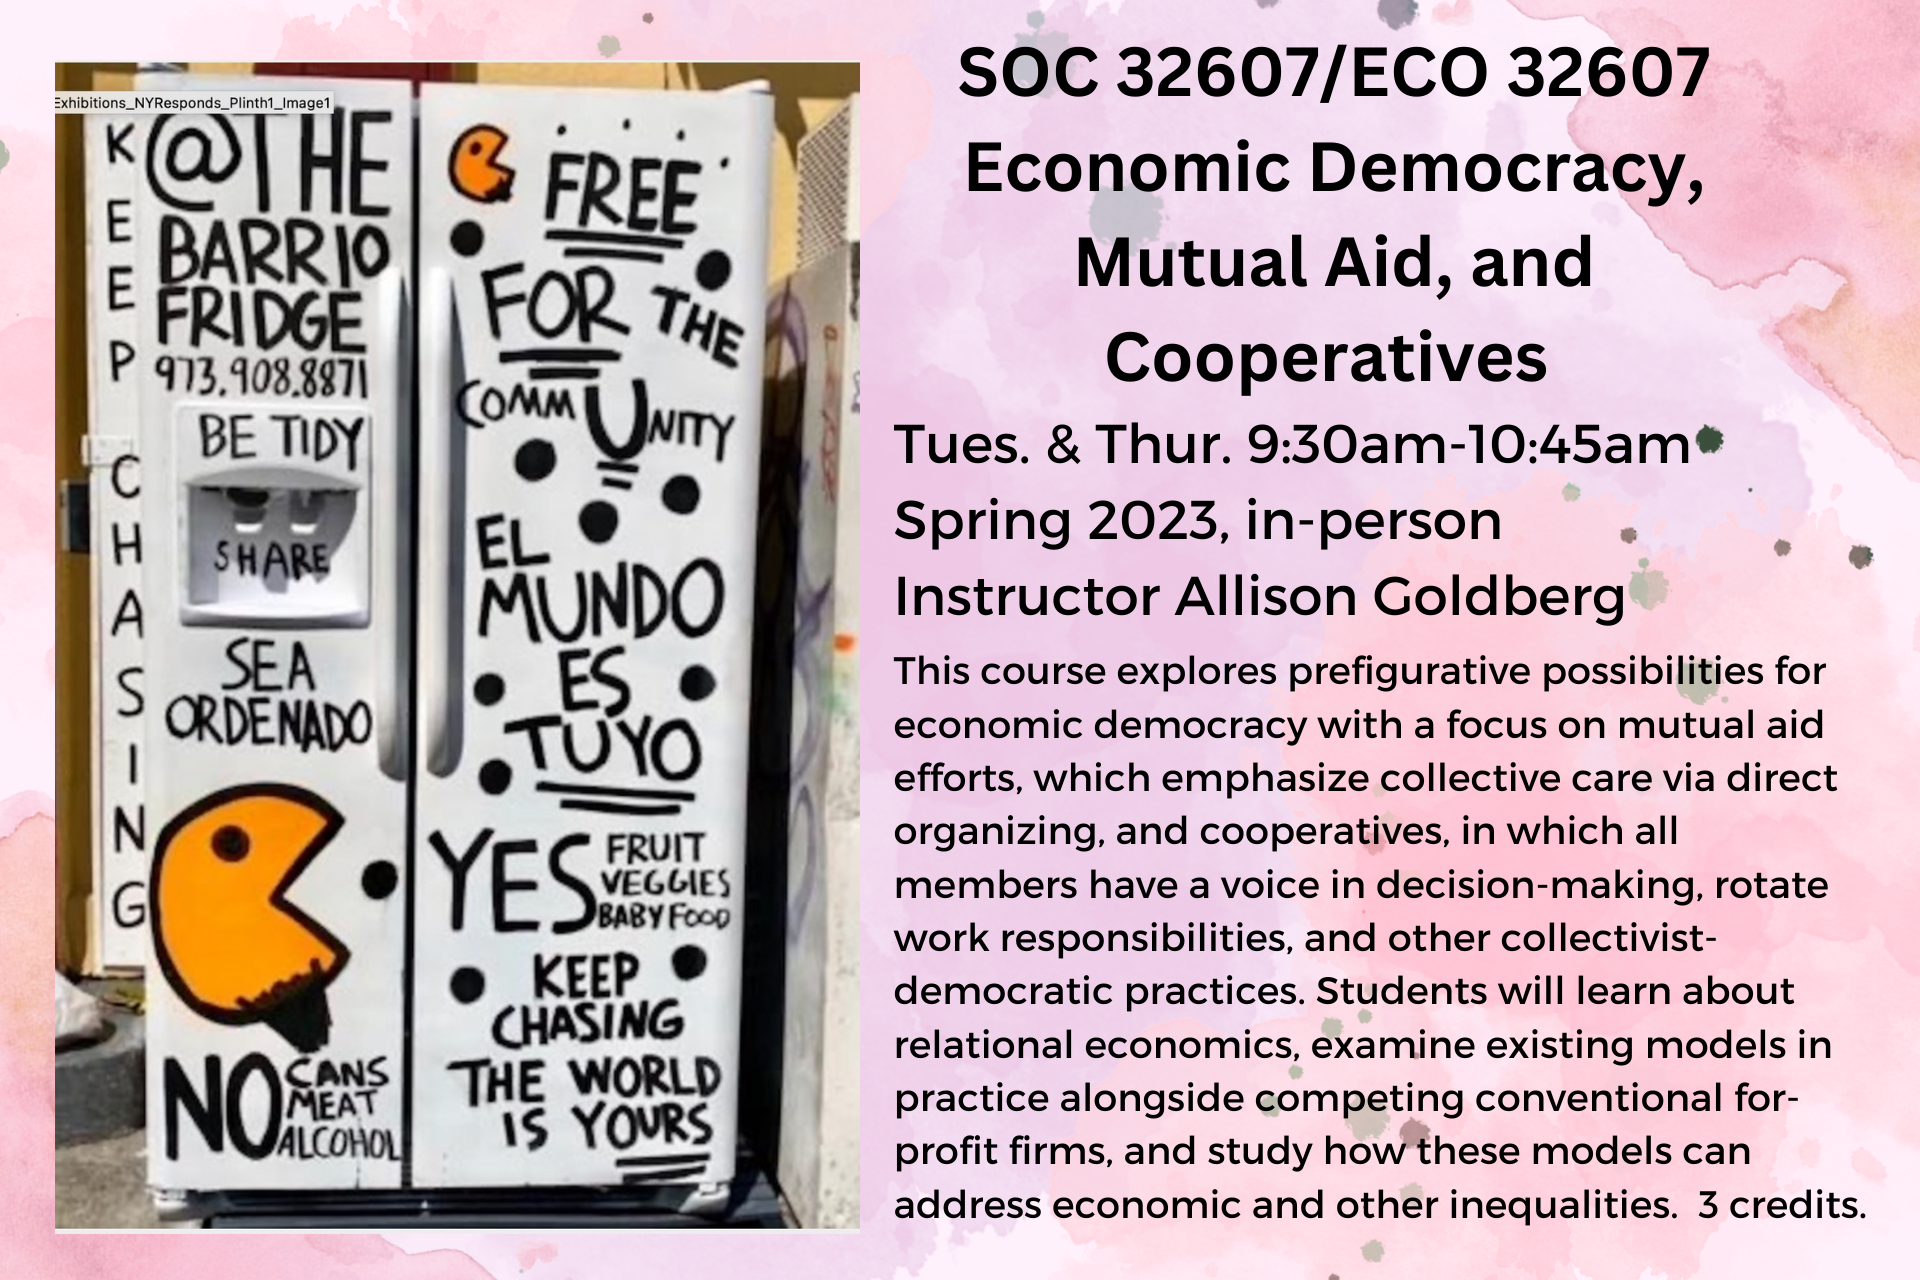 SOC 32607/ECO 32607 Economic Democracy, Mutual Aid, and Cooperatives Spring 2023 Course